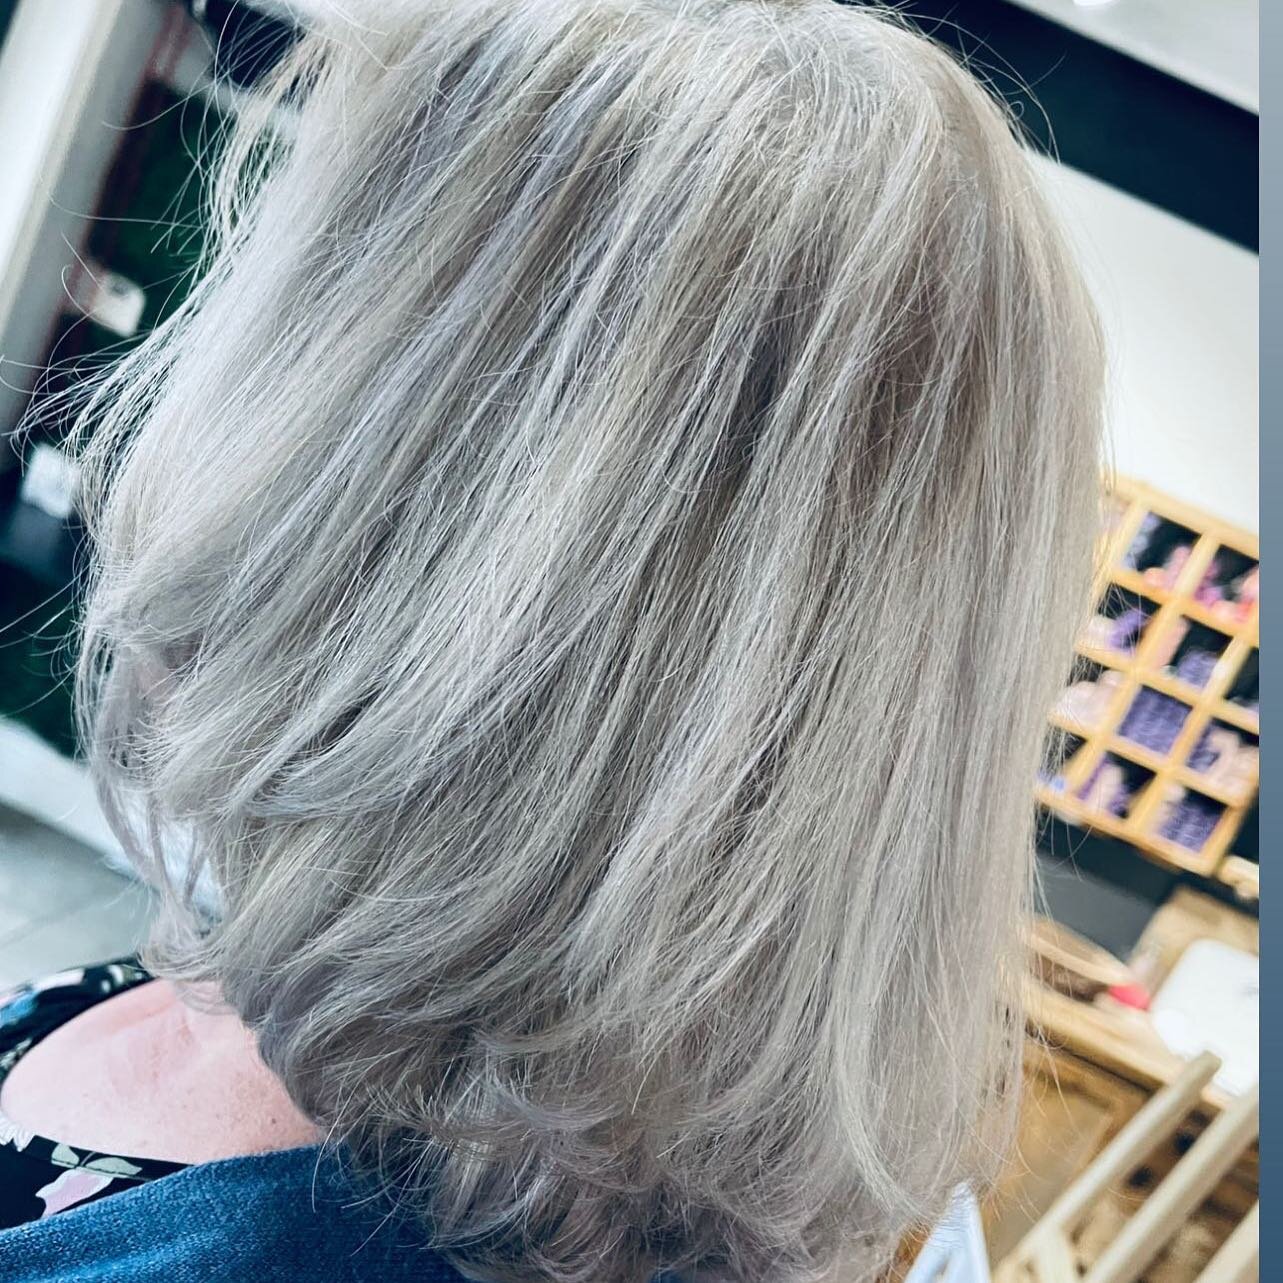 She is transitioning to her natural grey @sillistyles @coric6 #greyhairtransition #stlhairstylist #stlcolorist #greyhairdontcare